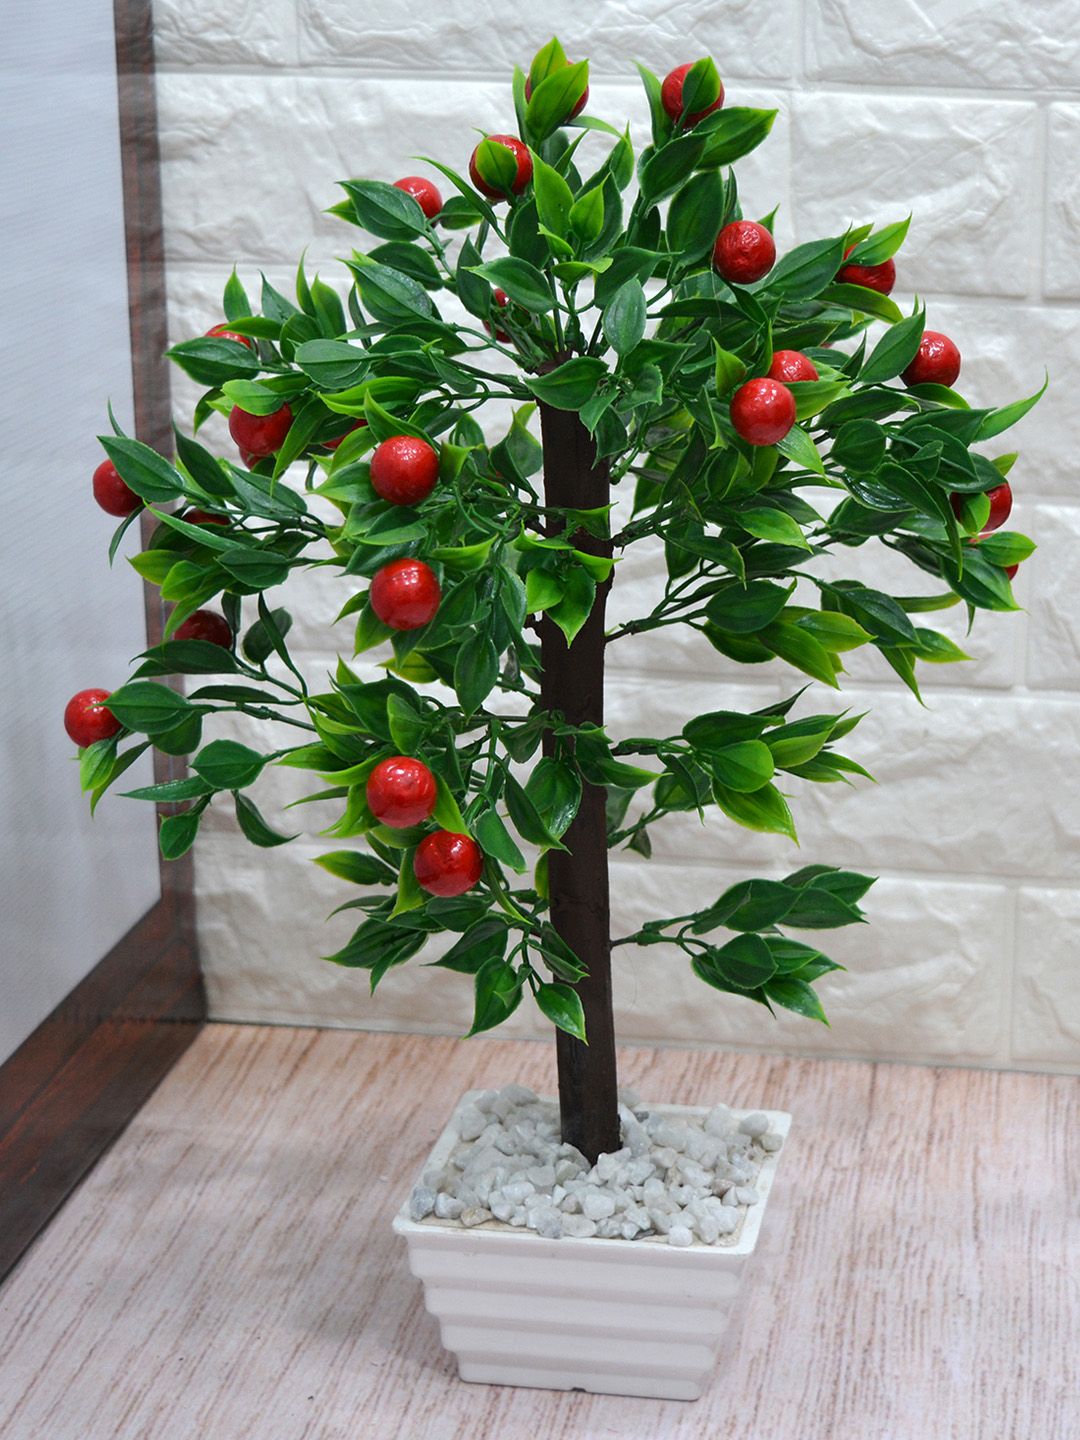 fancy mart Unisex Red & Green Artificial Bonsai Plant With Pot Price in India